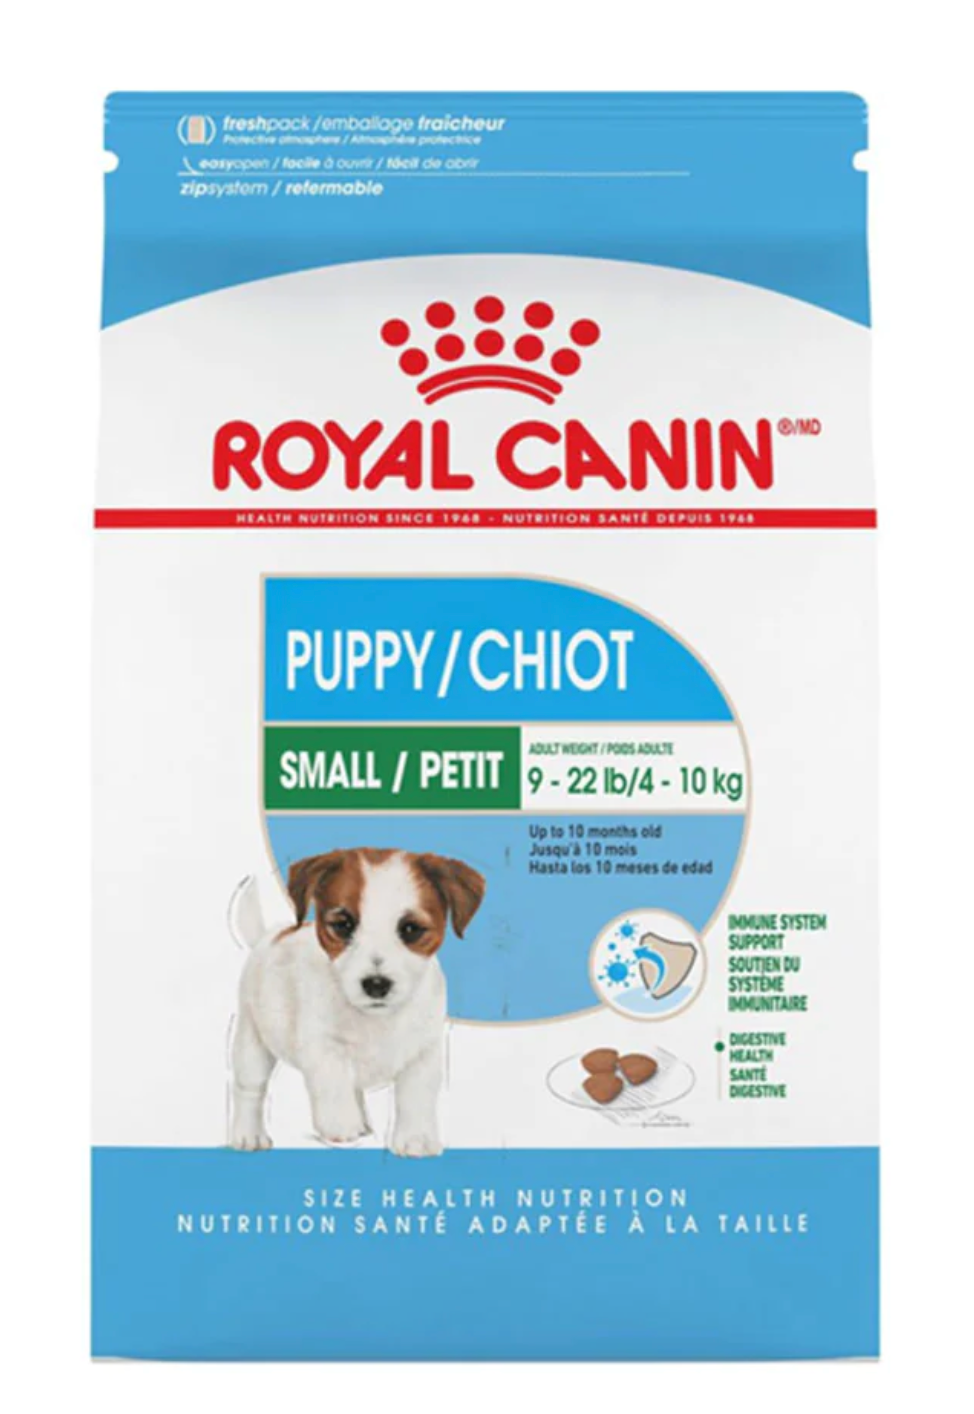 Royal Canin Small Puppy Indoor Chiot (13lbs bag)